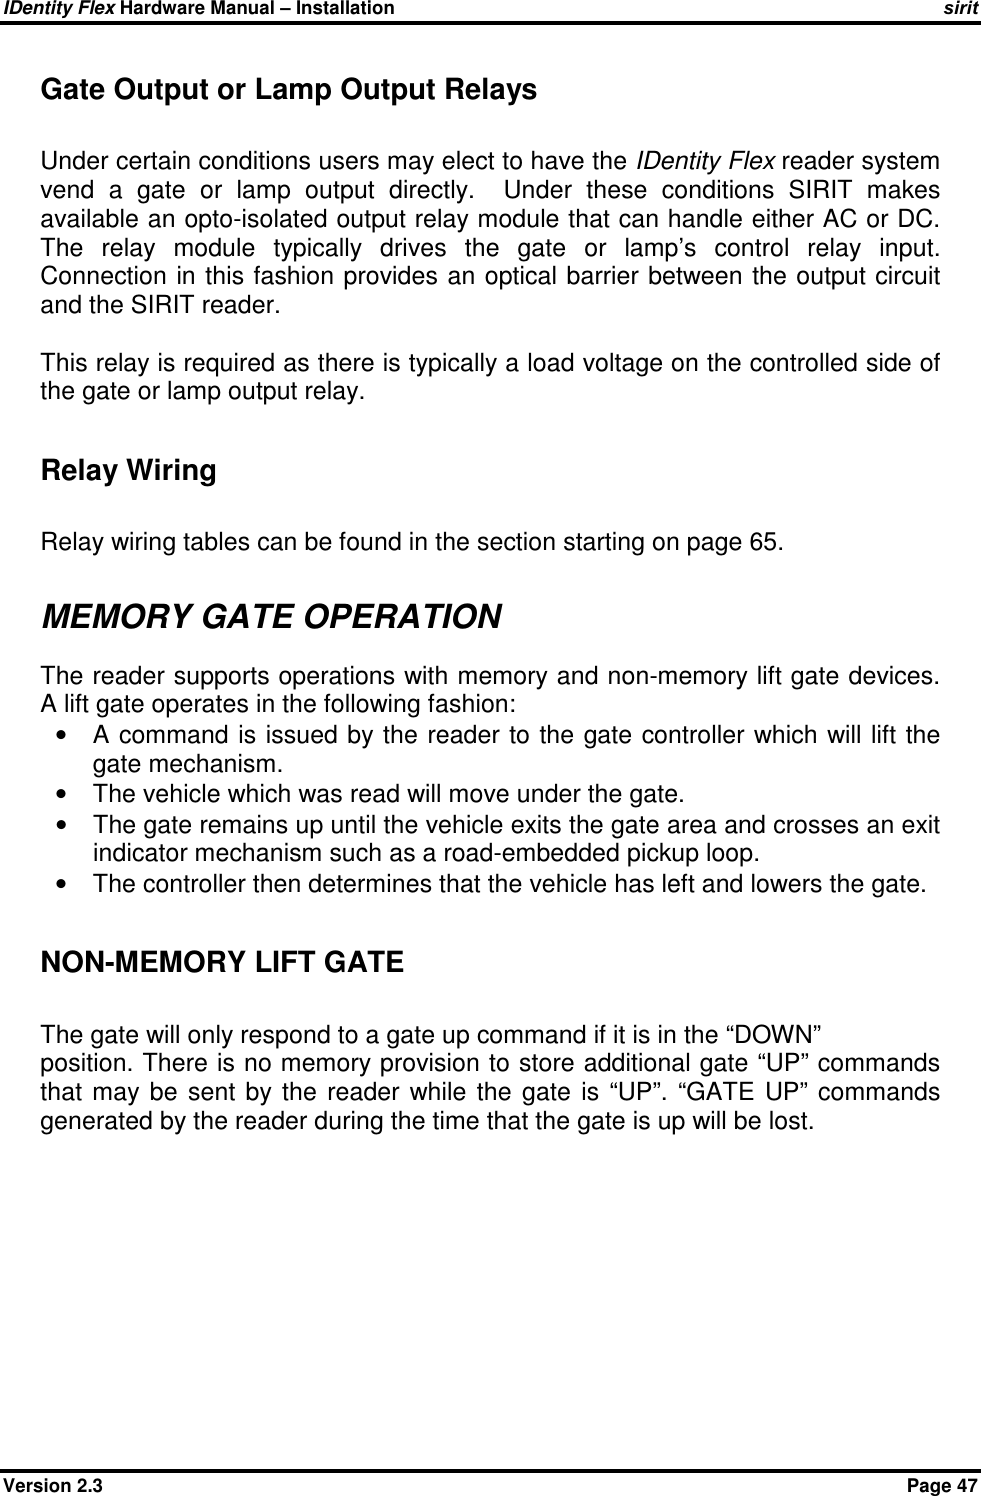 IDentity Flex Hardware Manual – Installation   sirit Version 2.3    Page 47 Gate Output or Lamp Output Relays  Under certain conditions users may elect to have the IDentity Flex reader system vend  a  gate  or  lamp  output  directly.    Under  these  conditions  SIRIT  makes available an opto-isolated output relay module that can handle either AC or DC. The  relay  module  typically  drives  the  gate  or  lamp’s  control  relay  input. Connection in this fashion provides an optical  barrier between the output circuit and the SIRIT reader.  This relay is required as there is typically a load voltage on the controlled side of the gate or lamp output relay.  Relay Wiring  Relay wiring tables can be found in the section starting on page 65.  MEMORY GATE OPERATION The reader supports operations with memory and non-memory lift gate devices. A lift gate operates in the following fashion: •  A command is issued by the  reader to the gate controller which will lift the gate mechanism.  •  The vehicle which was read will move under the gate.  •  The gate remains up until the vehicle exits the gate area and crosses an exit indicator mechanism such as a road-embedded pickup loop.  •  The controller then determines that the vehicle has left and lowers the gate.  NON-MEMORY LIFT GATE  The gate will only respond to a gate up command if it is in the “DOWN” position. There is no memory provision to store additional gate “UP” commands that  may  be  sent  by  the  reader  while  the  gate  is  “UP”.  “GATE  UP”  commands generated by the reader during the time that the gate is up will be lost.  